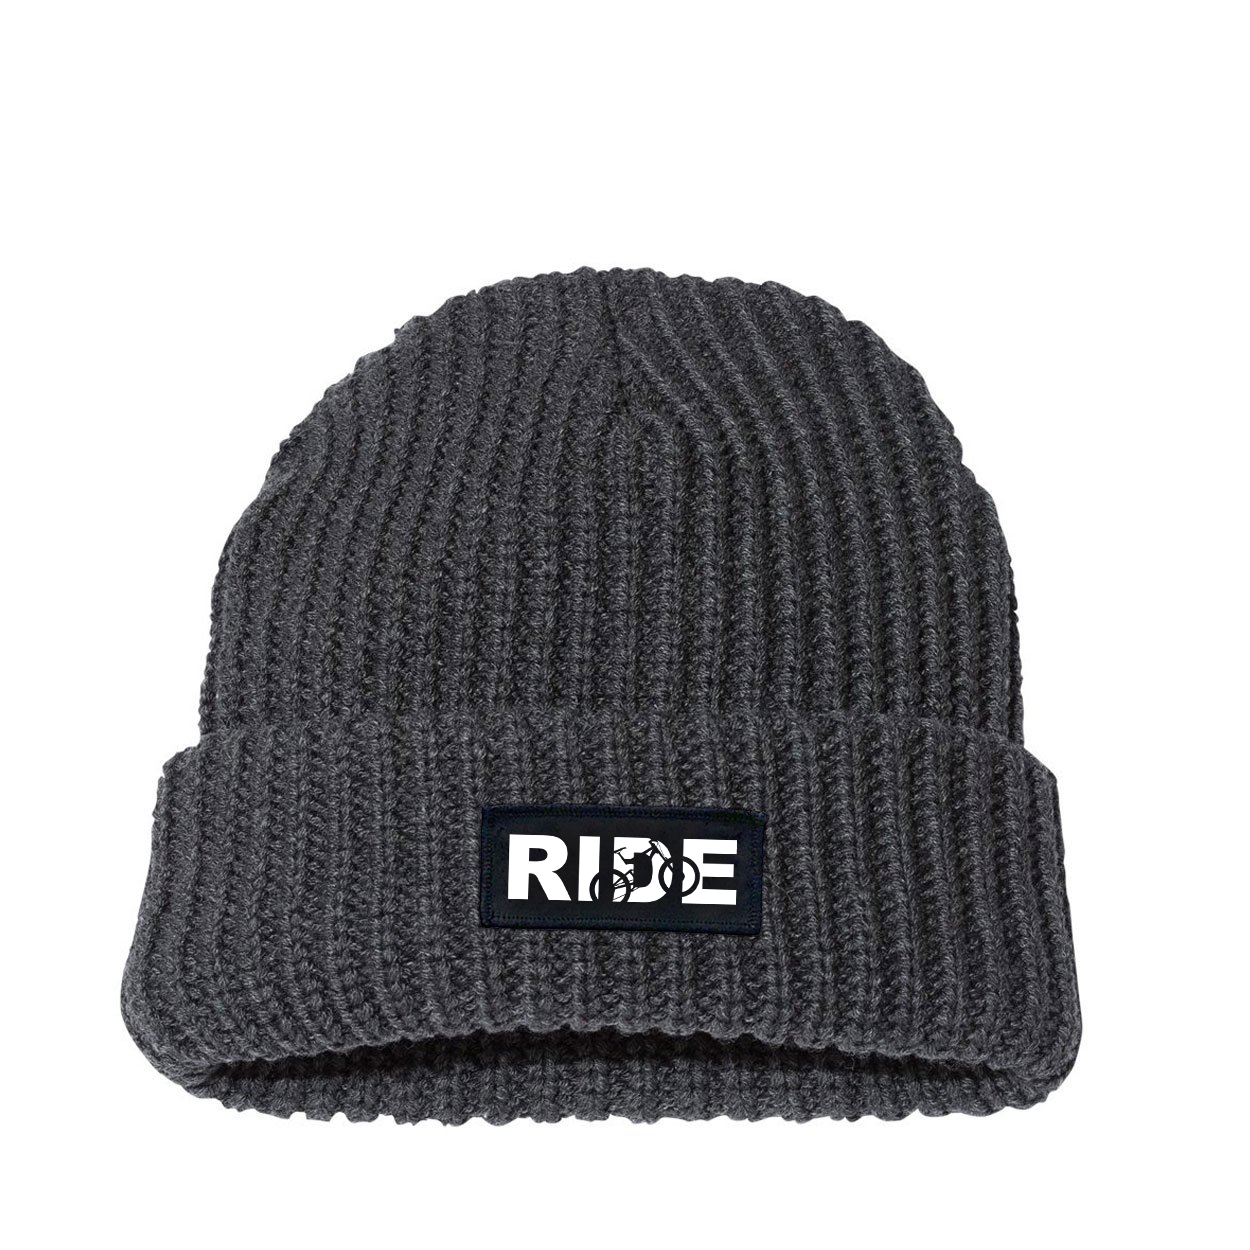 Ride Mtb Logo Night Out Woven Patch Roll Up Jumbo Chunky Knit Beanie Charcoal (White Logo)